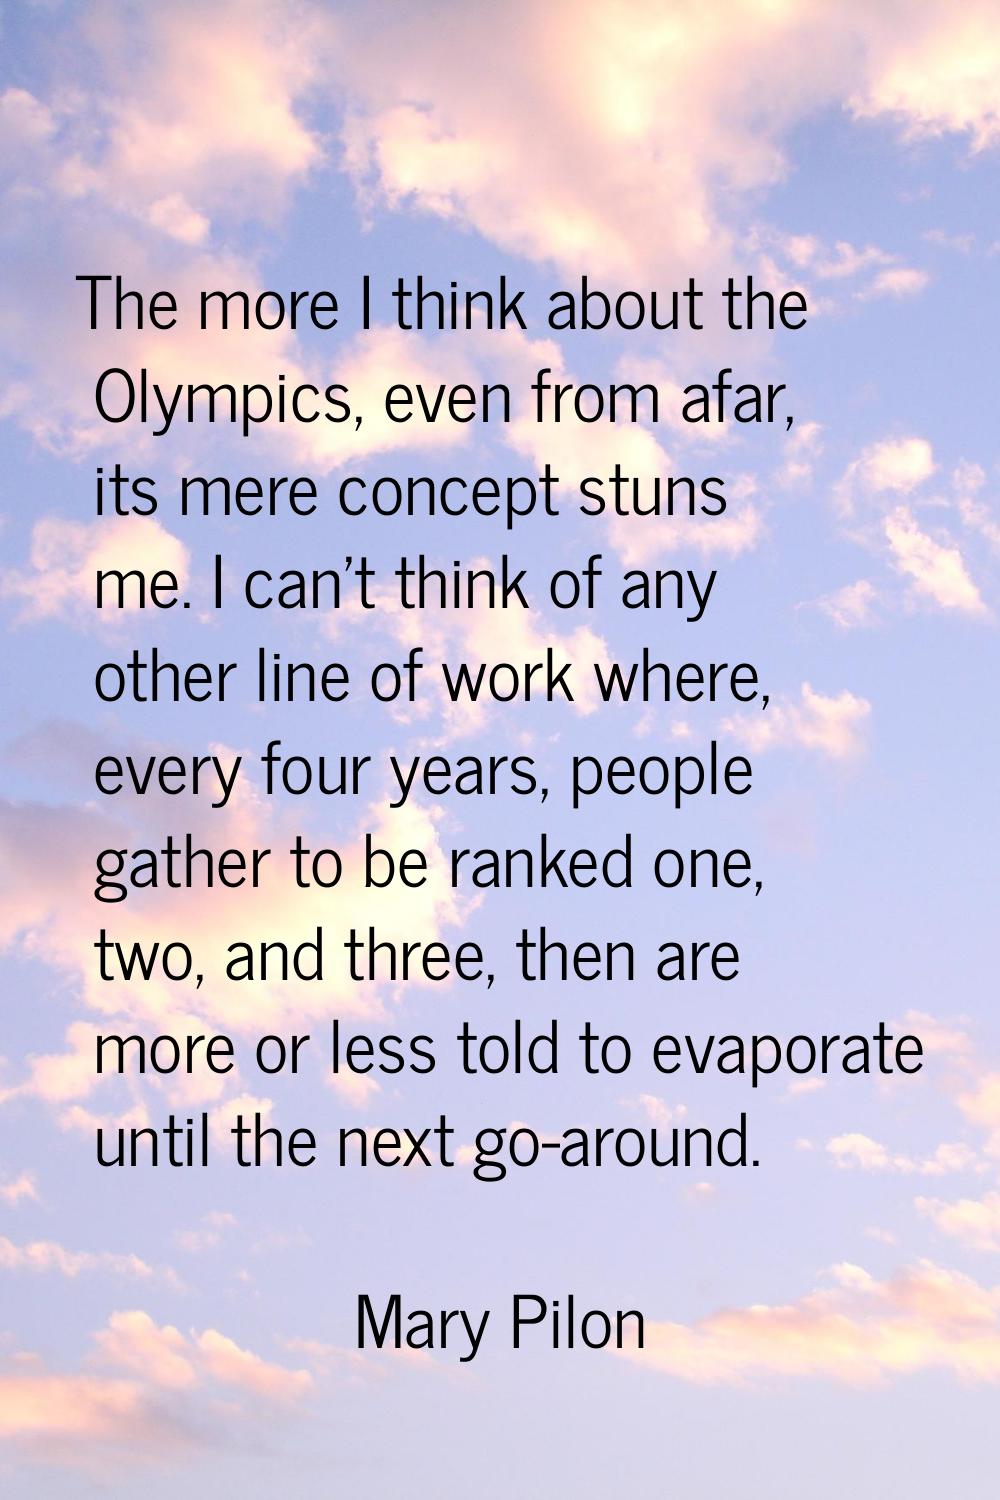 The more I think about the Olympics, even from afar, its mere concept stuns me. I can't think of an